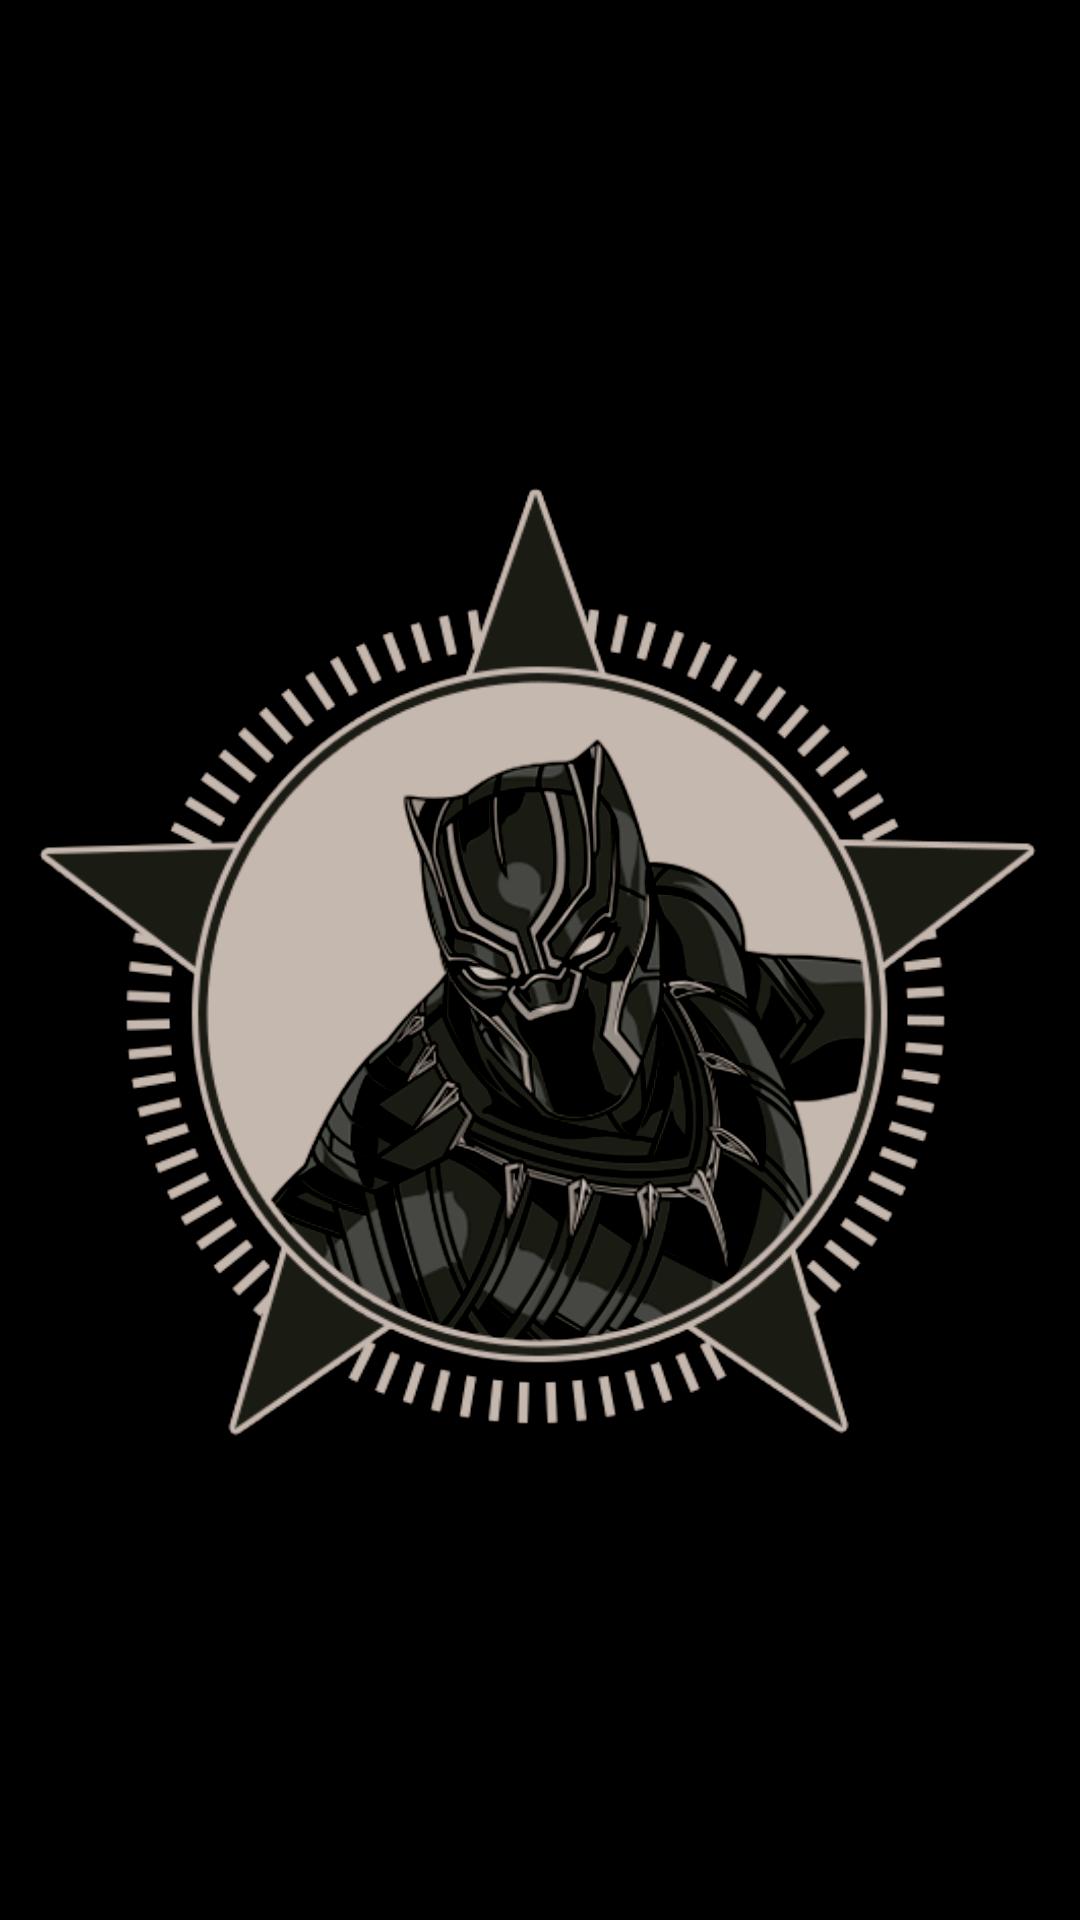 1080 x 1920 · png - Black Panther Logo Wallpapers - Wallpaper Cave